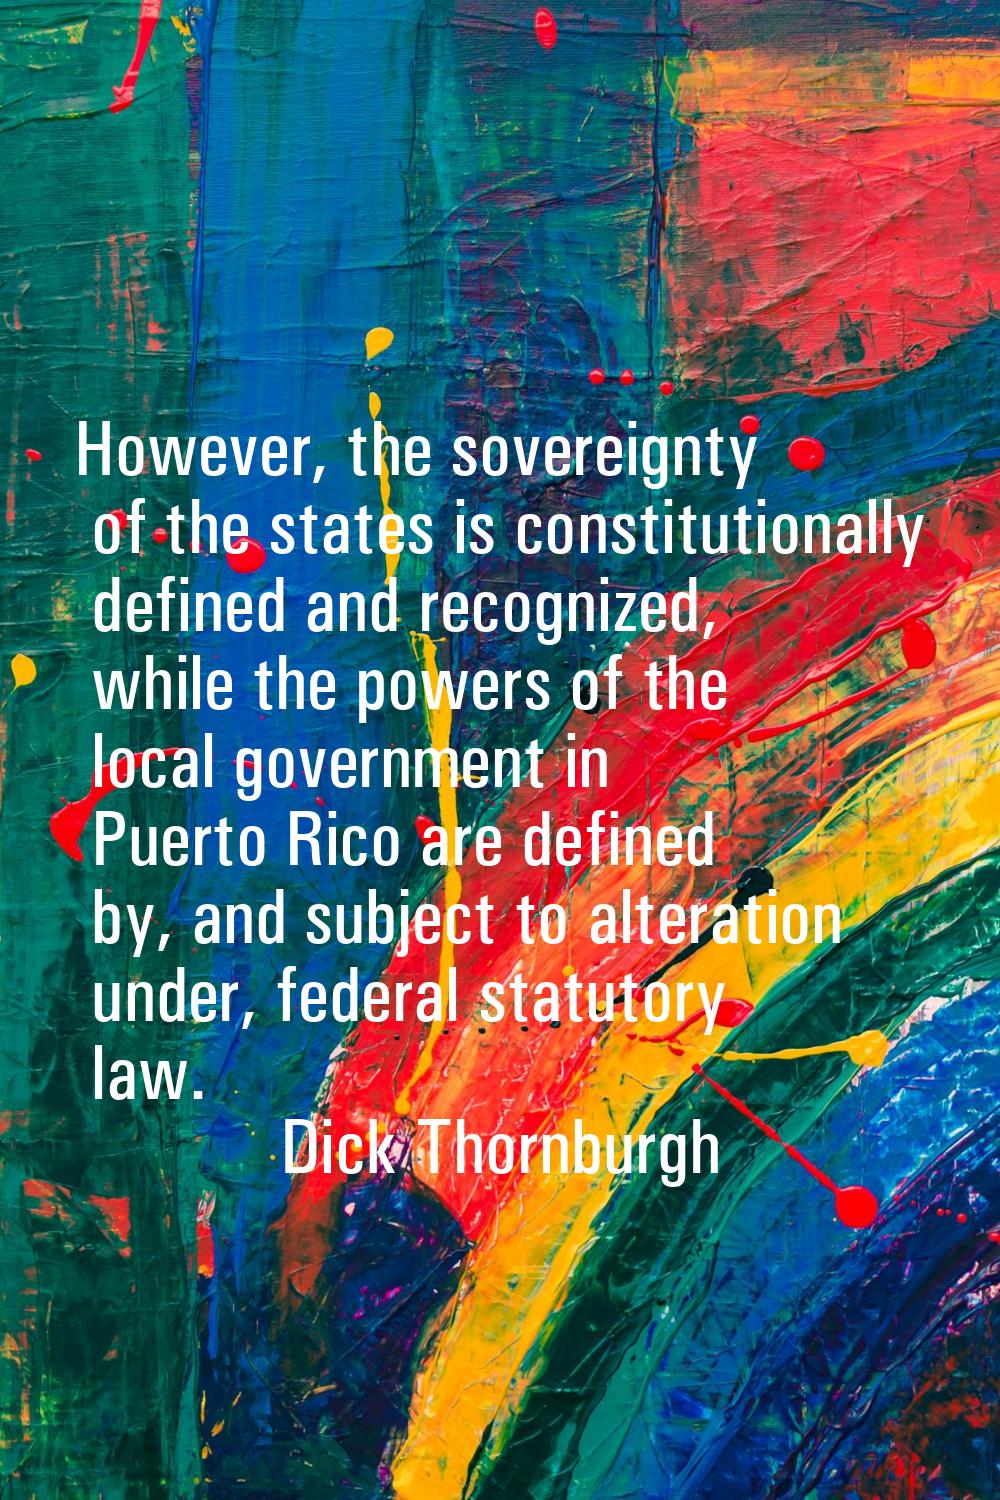 However, the sovereignty of the states is constitutionally defined and recognized, while the powers